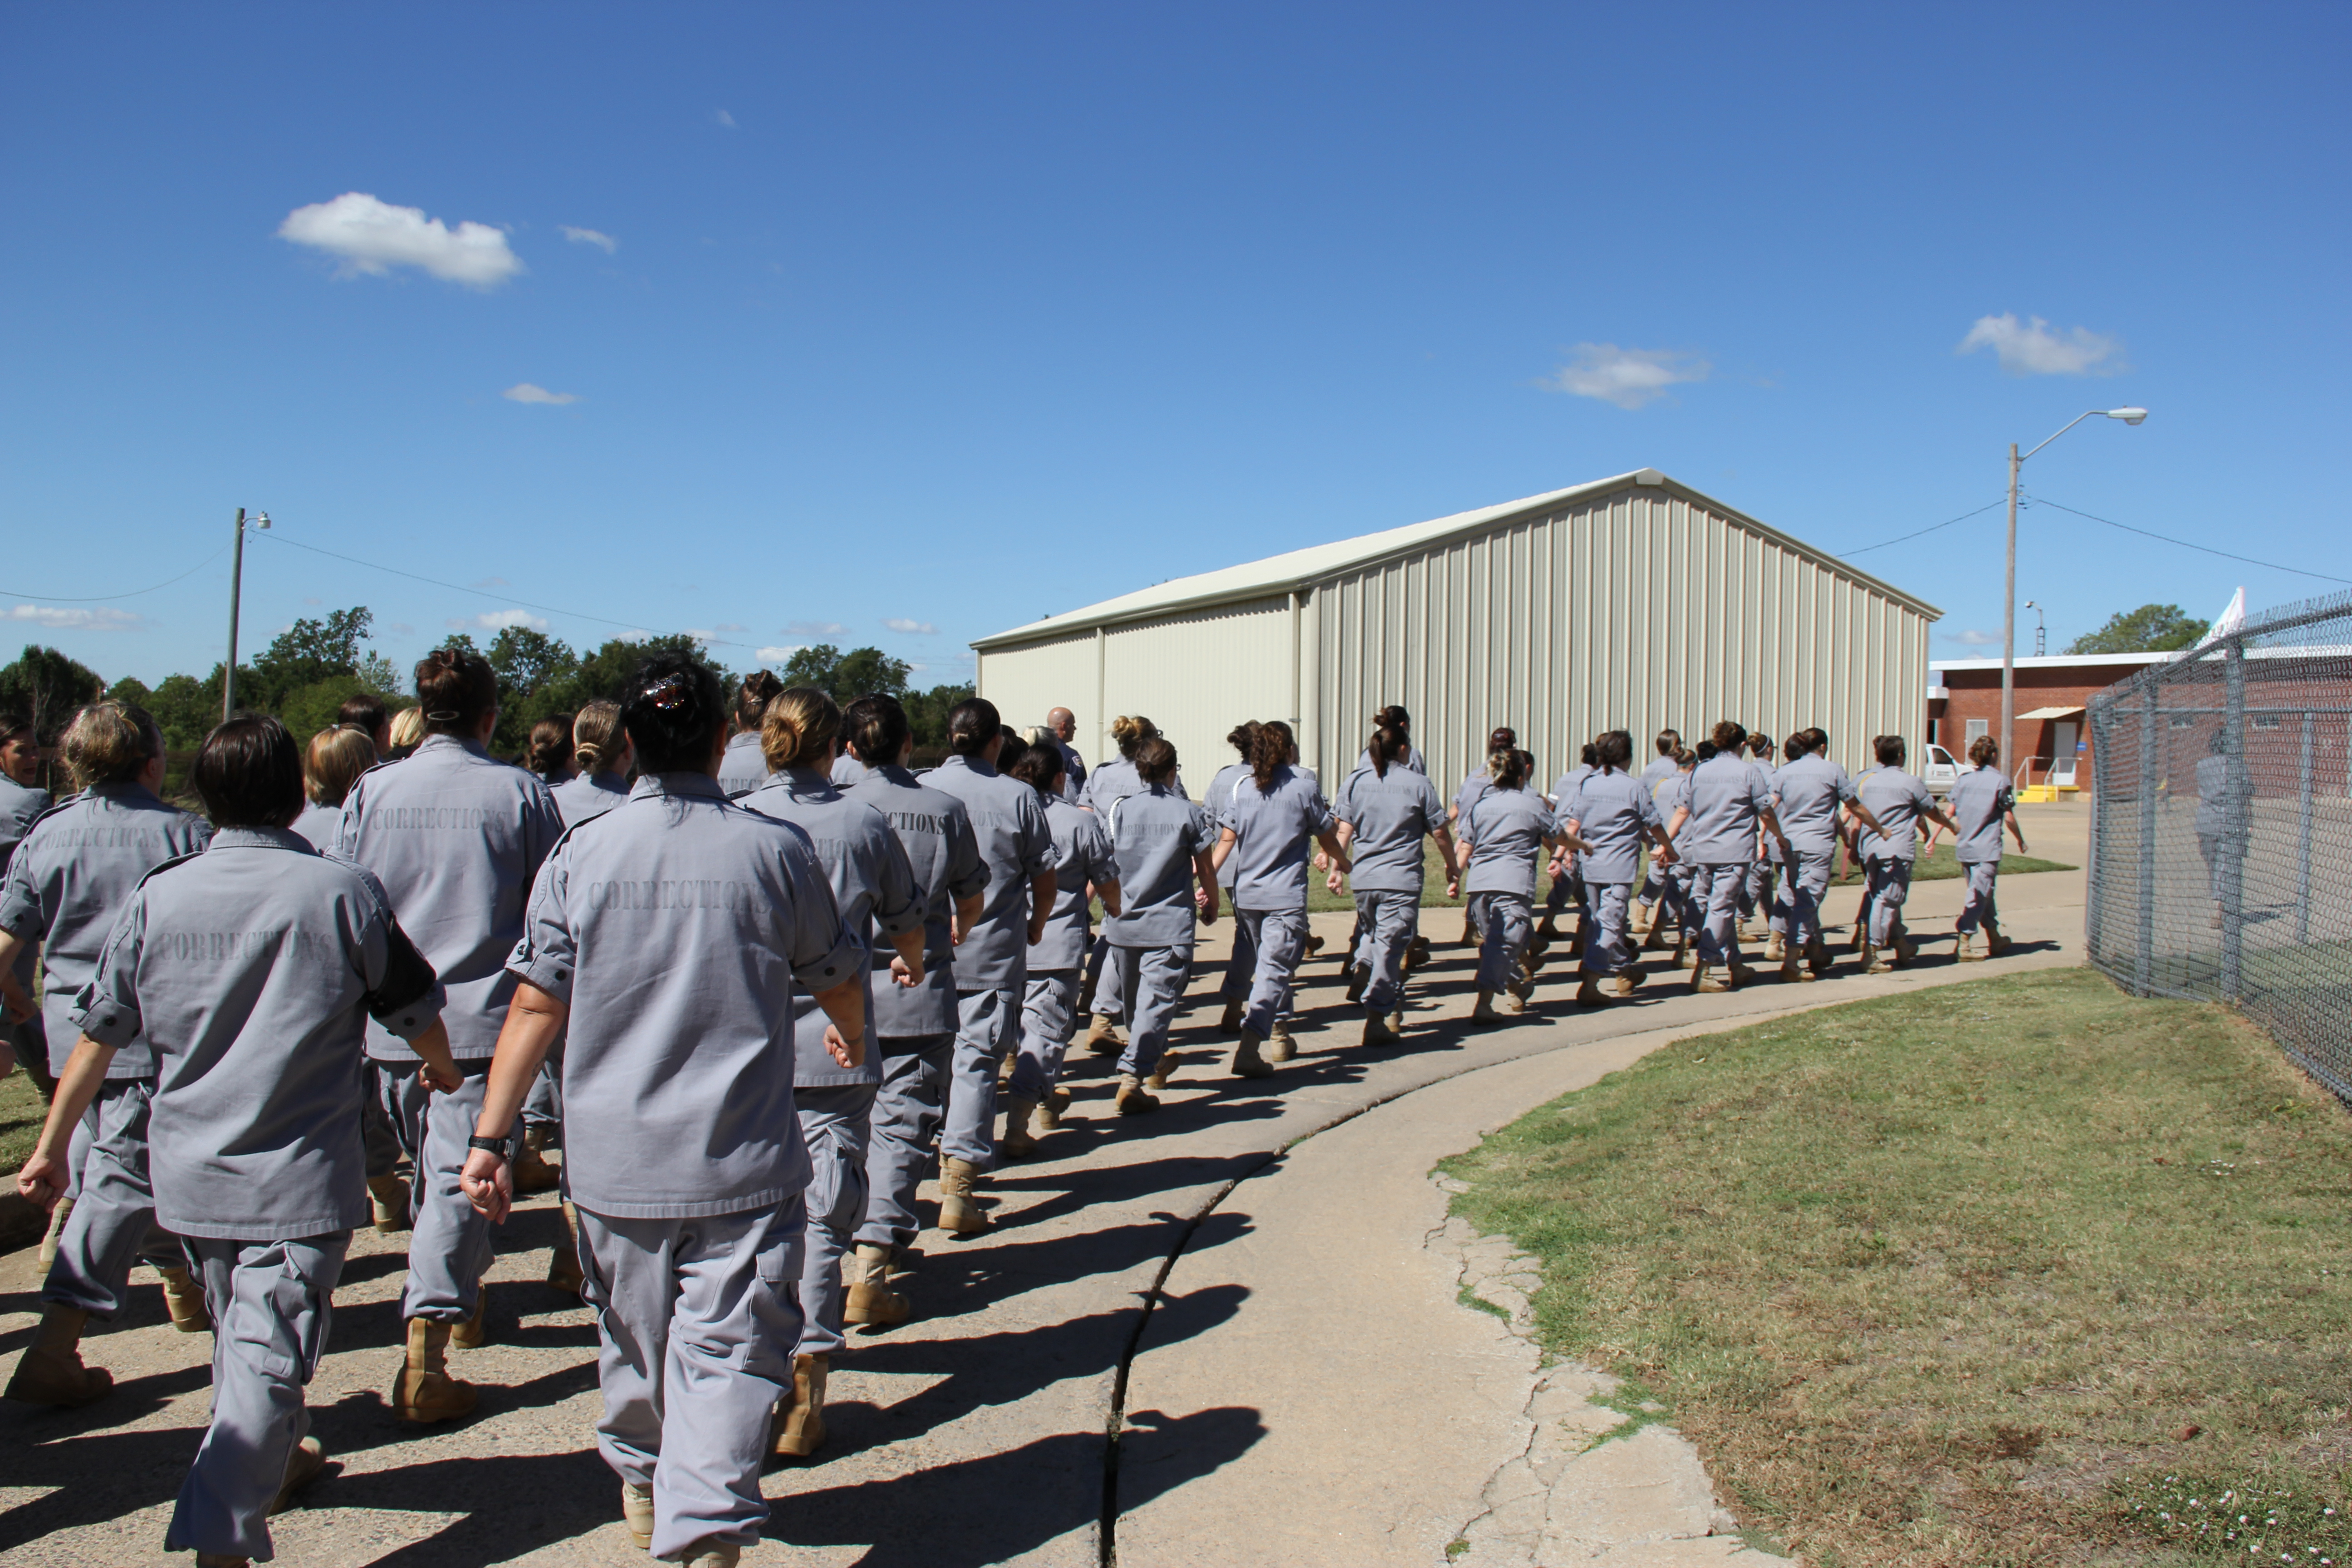 Let down and locked up Why Oklahoma’s female incarceration is so high